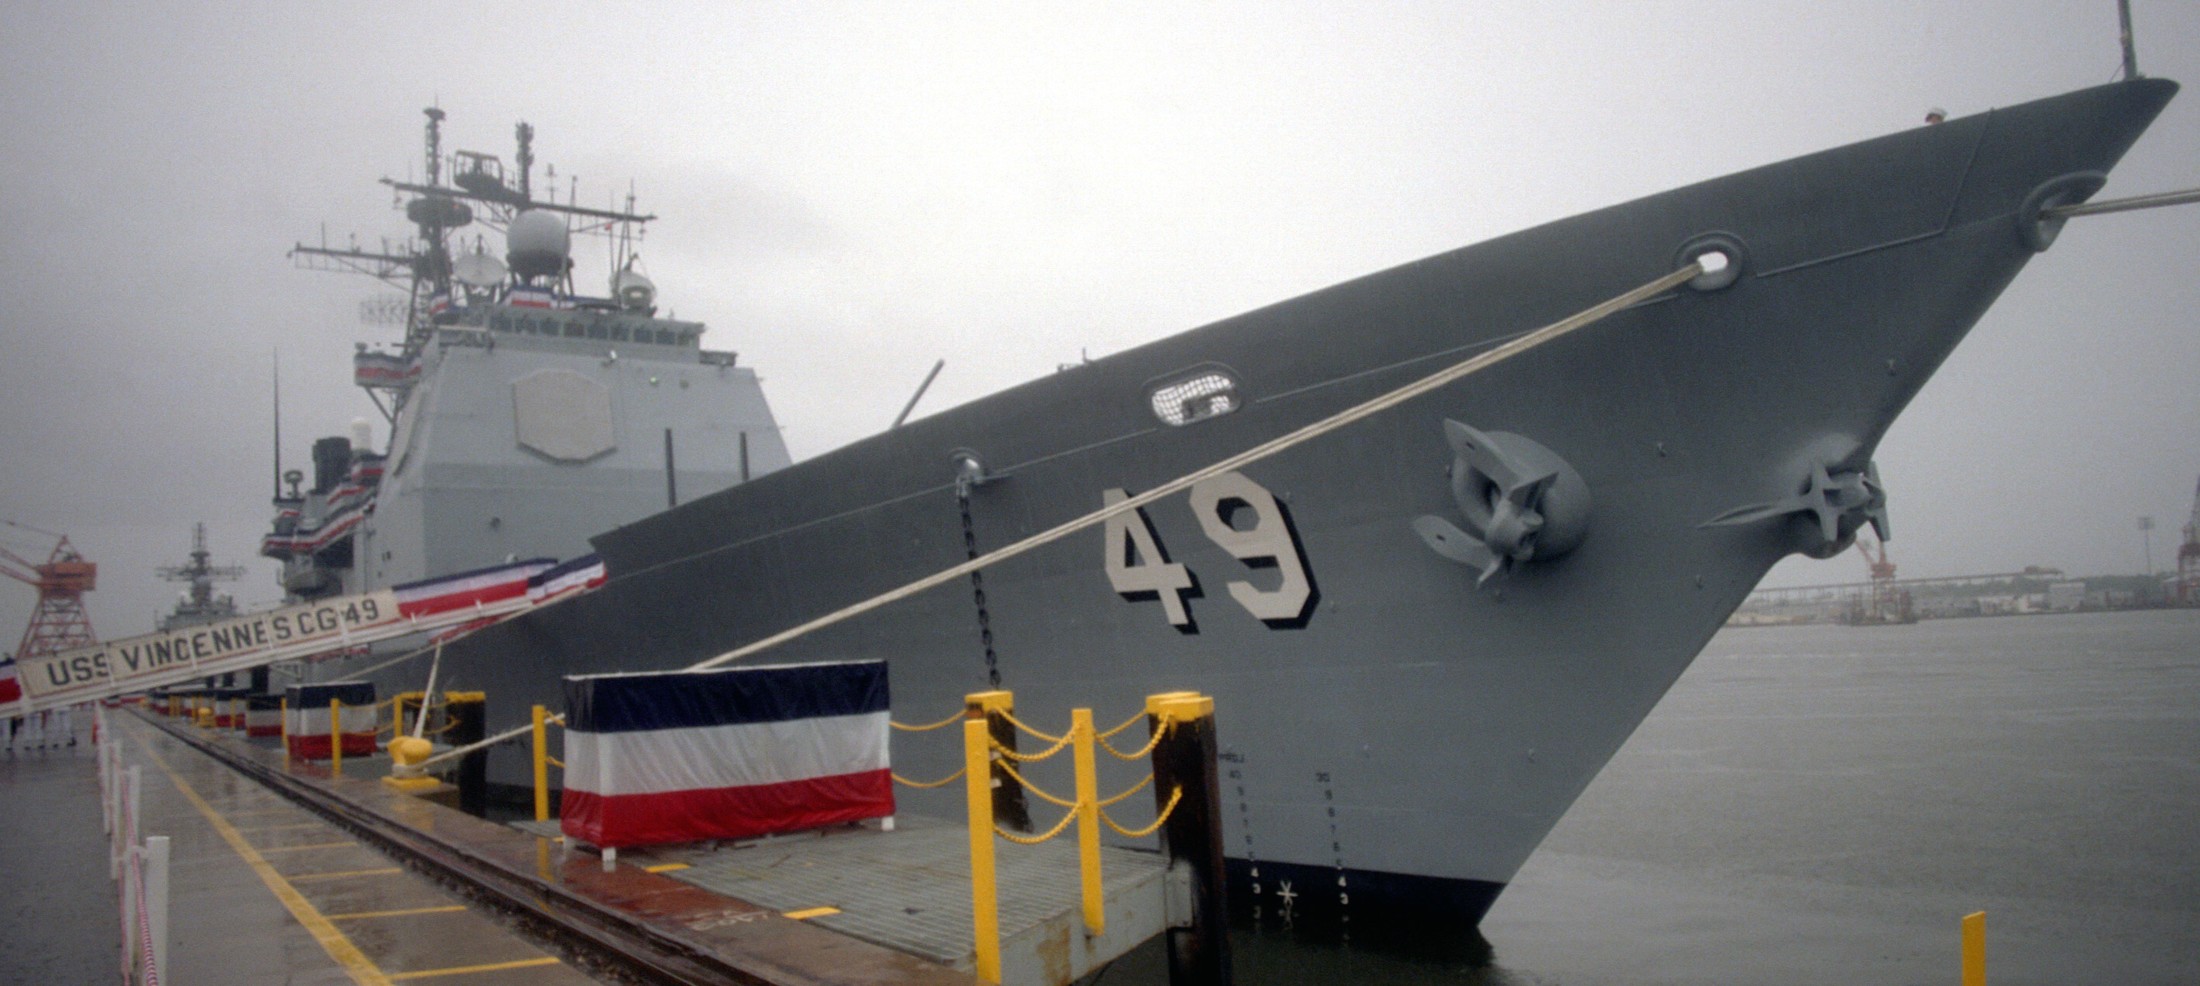 cg-49 uss vincennes ticonderoga class guided missile cruiser aegis us navy commissioning pascagoula mississippi 48